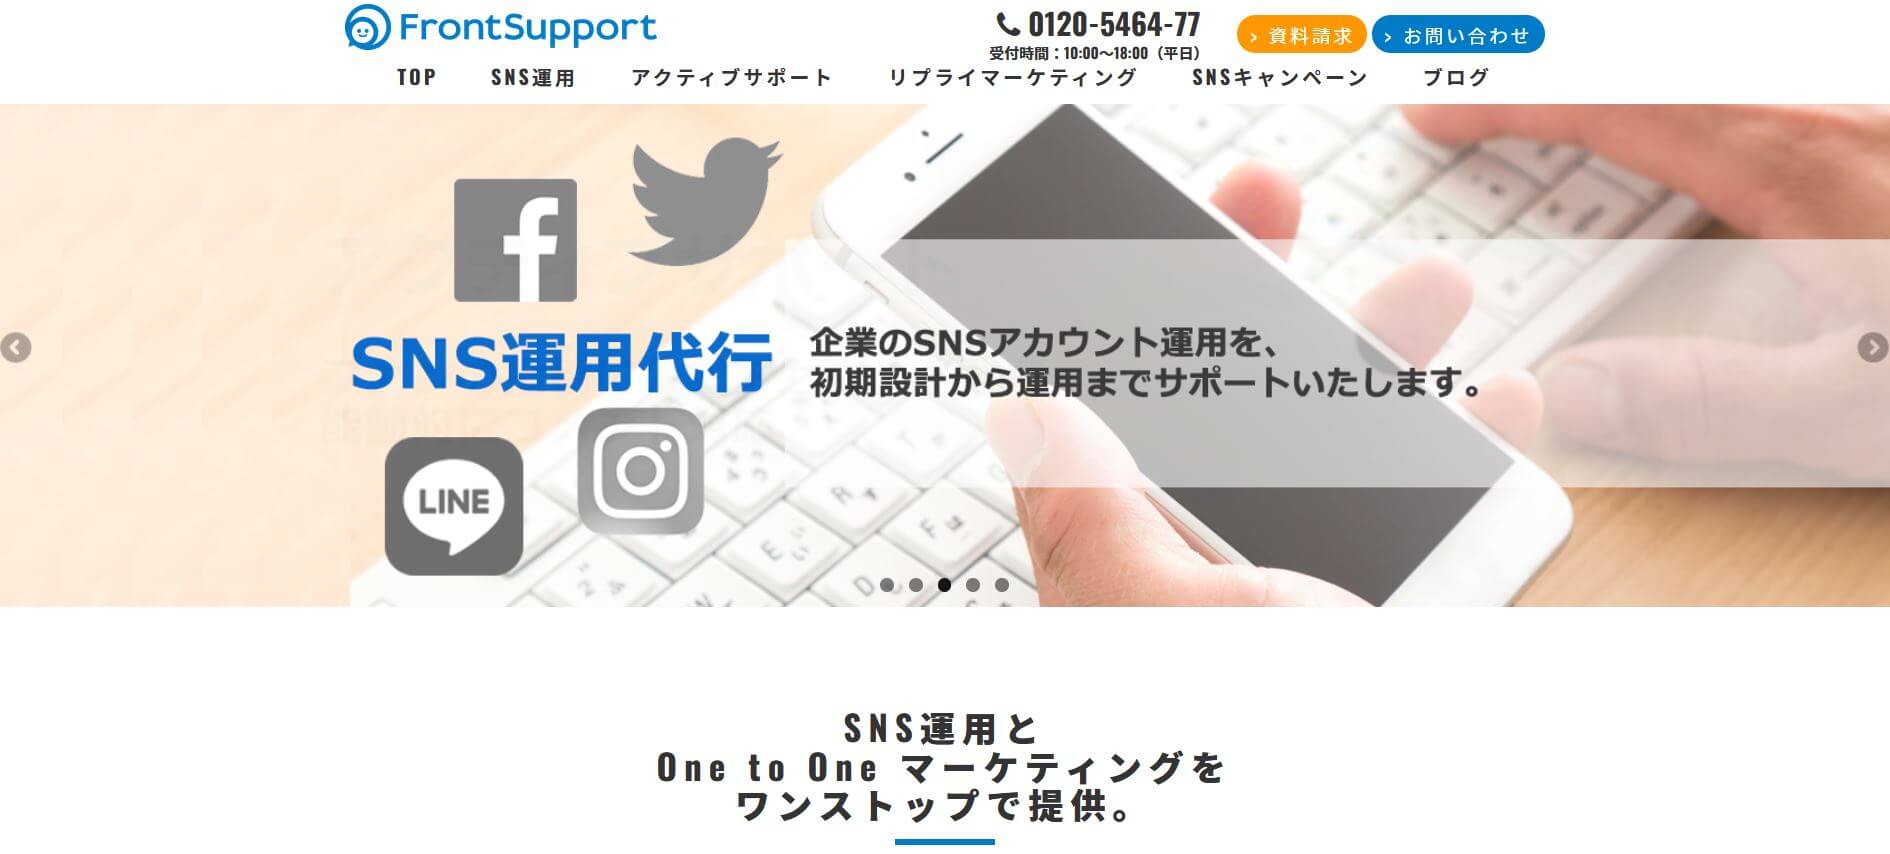 FrontSupport公式サイト